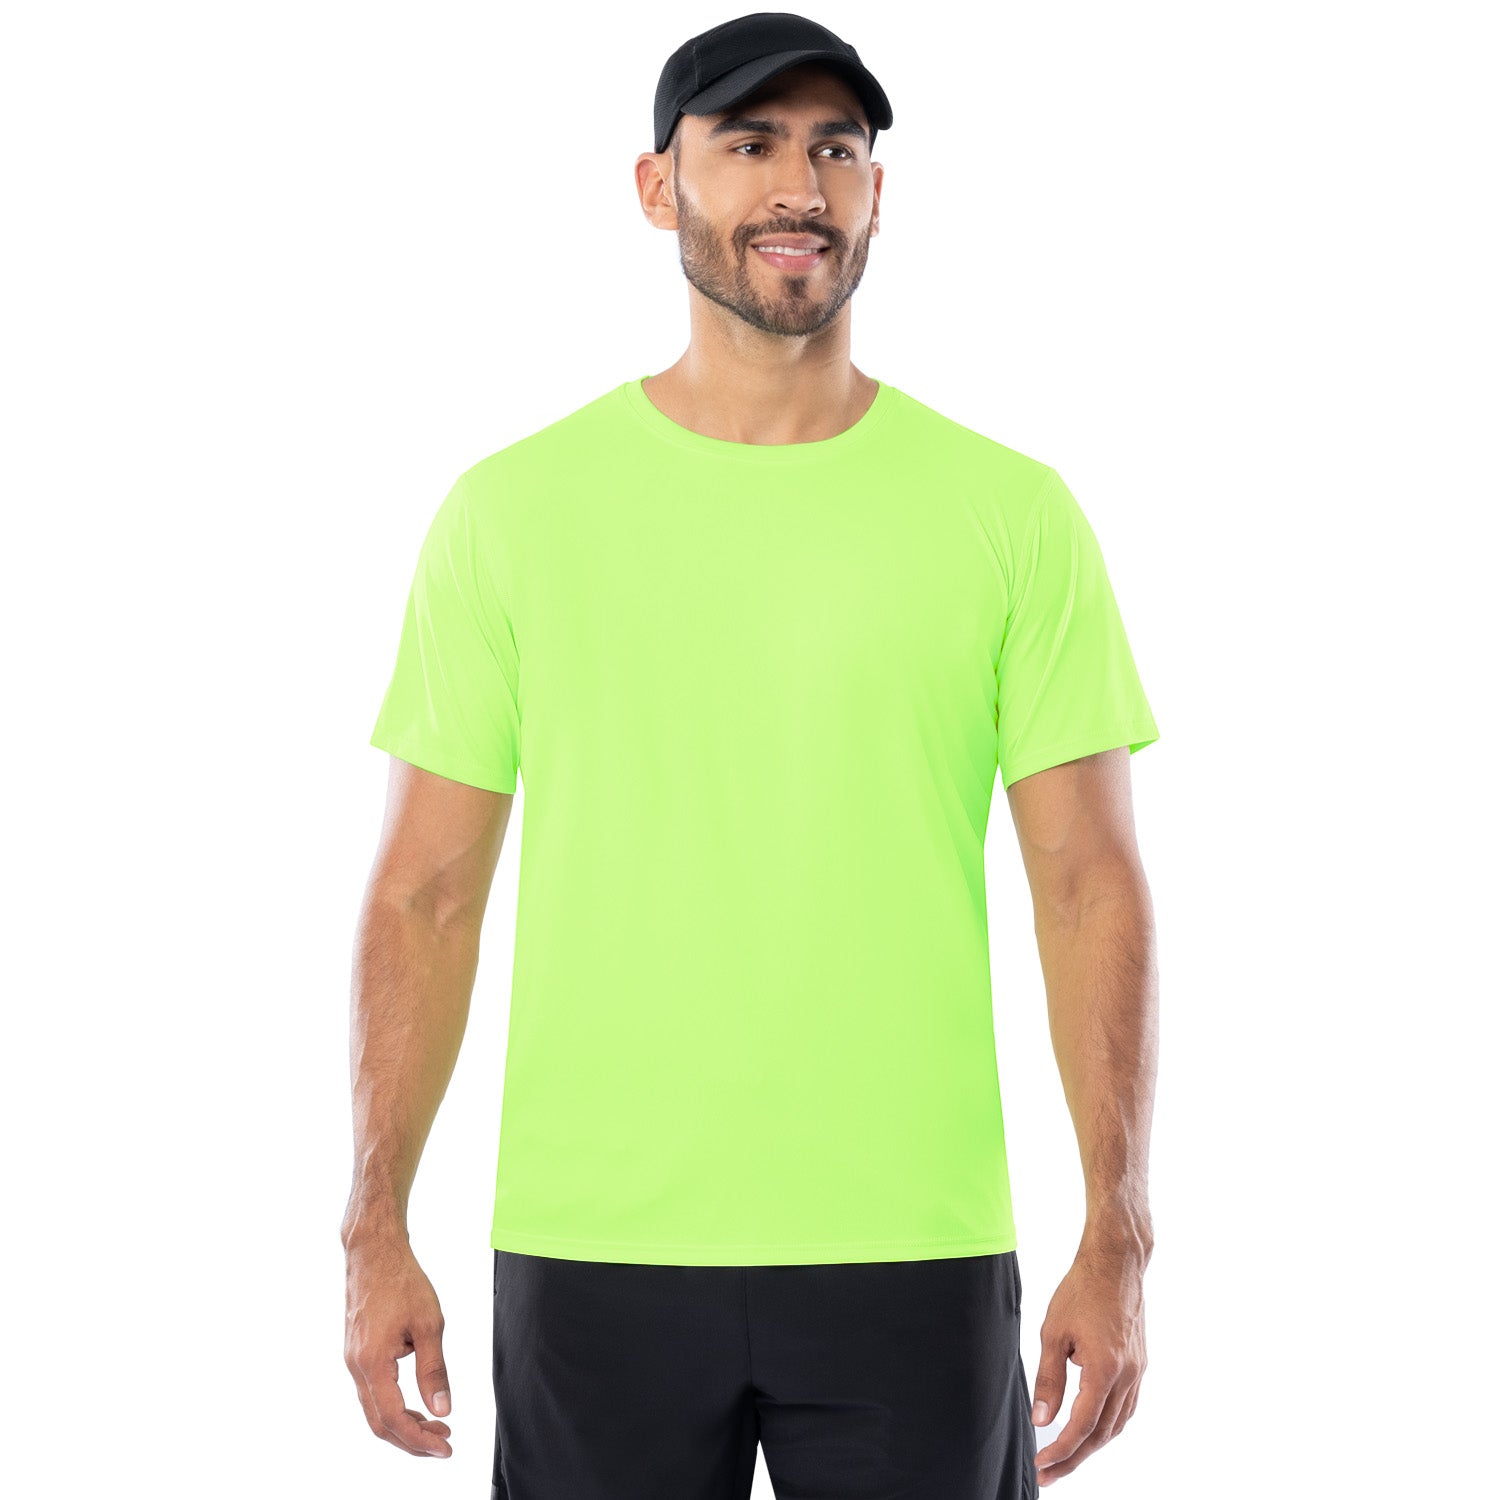 Men's Yellow Reflective Training T-Shirt Front View